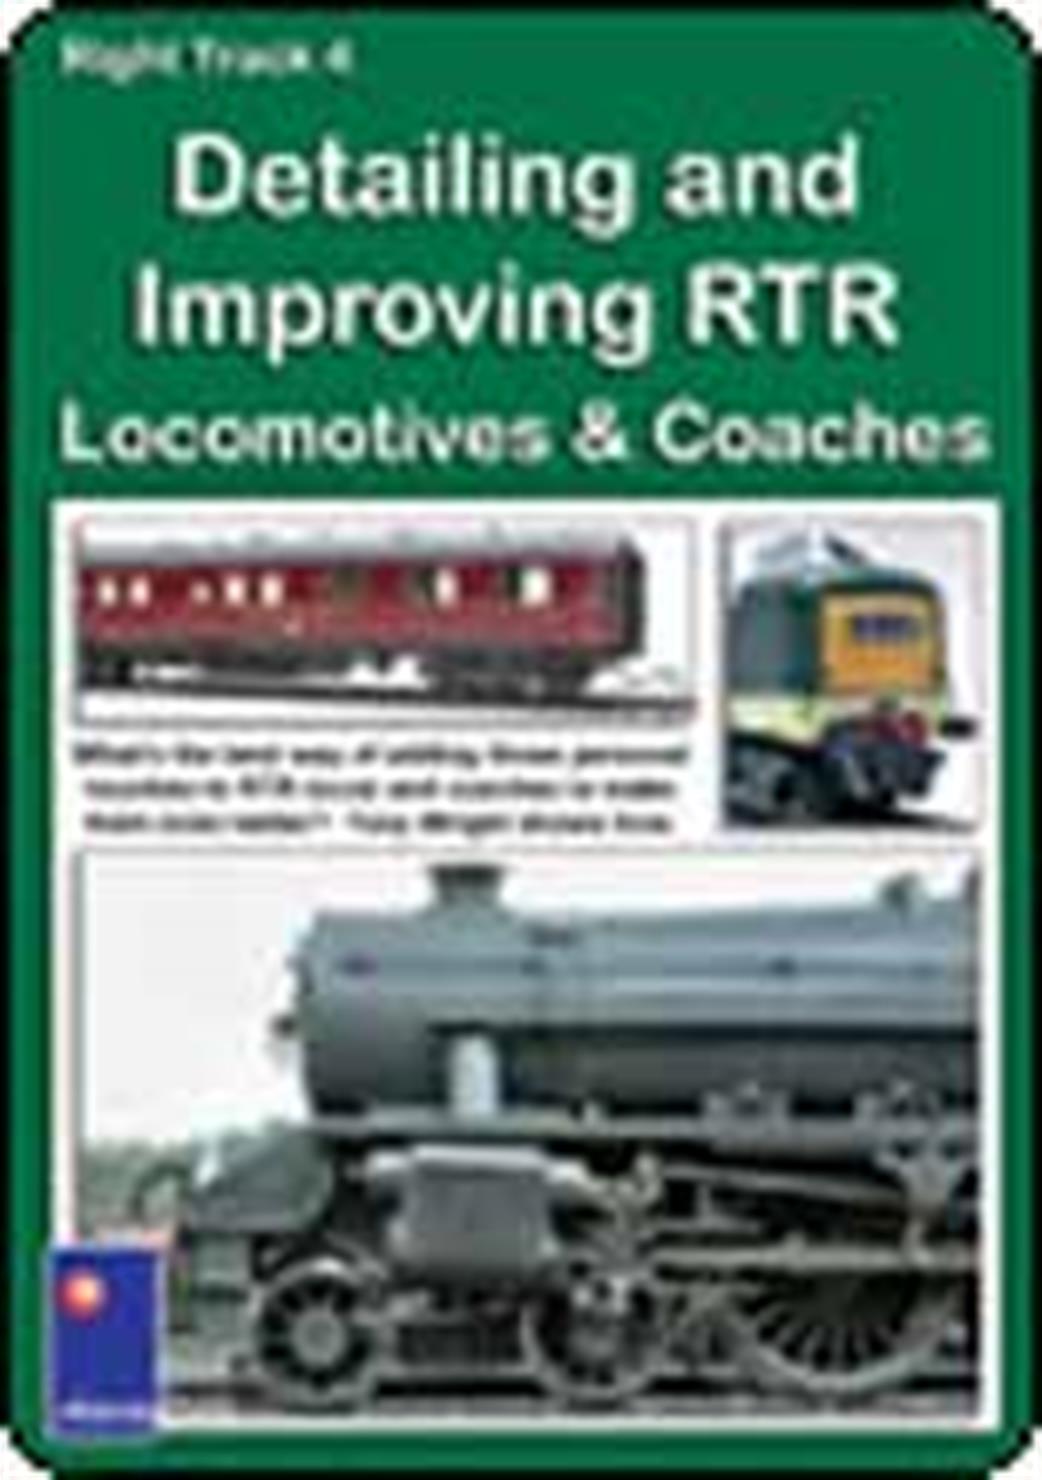 Activity Media RT4 Detailing and Improving RTR Locomotives & Coaches Right Track DVD 4